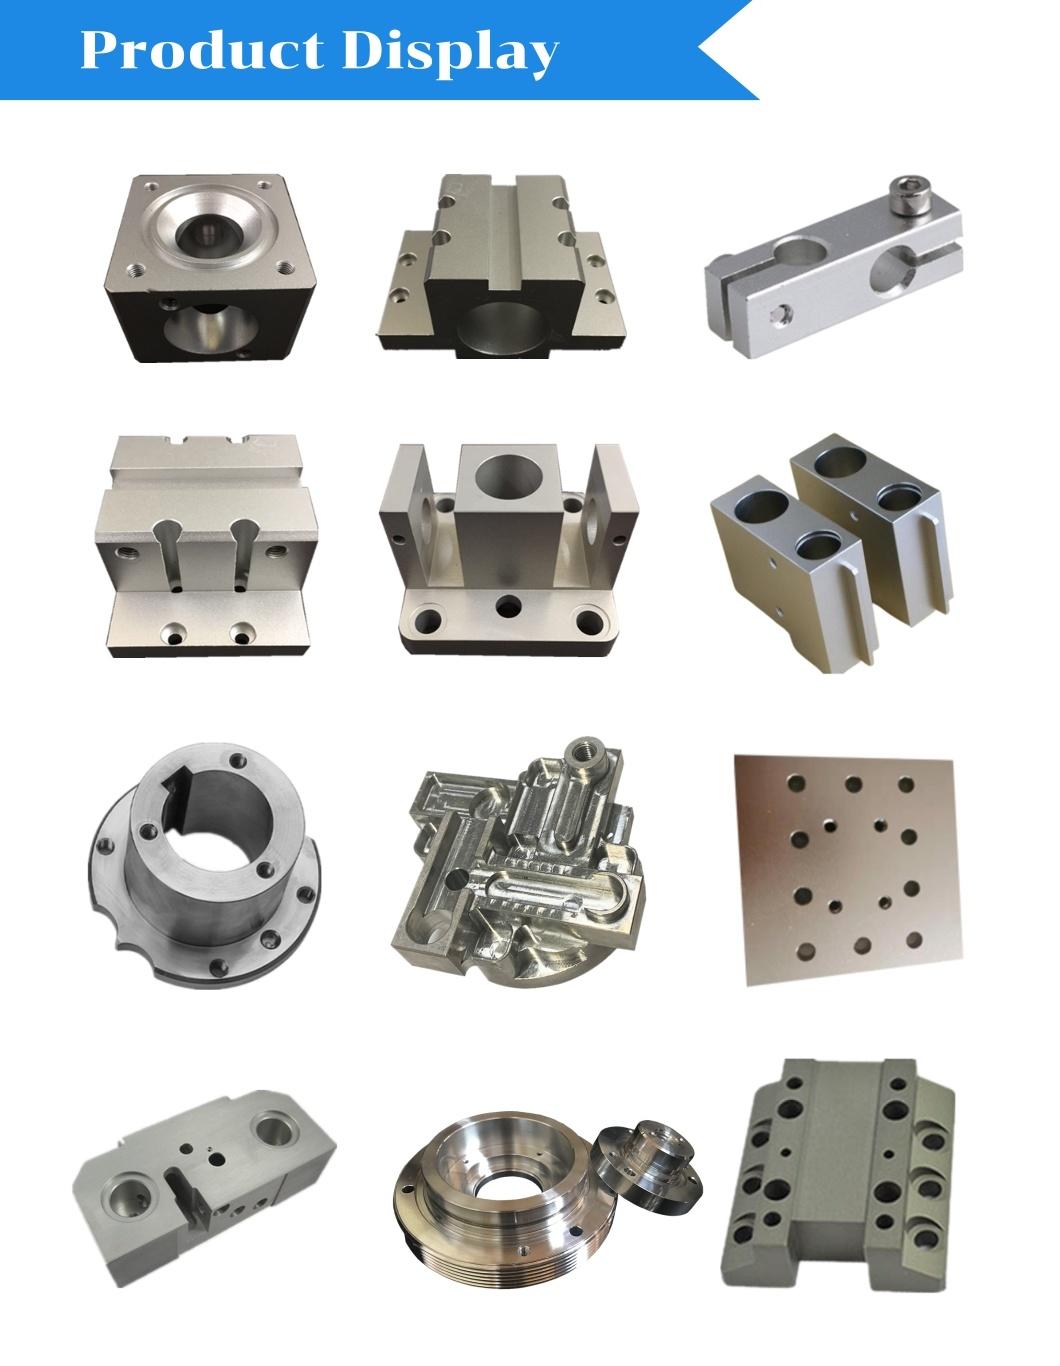 Steel Forgings and Turning Parts at Favorable Prices